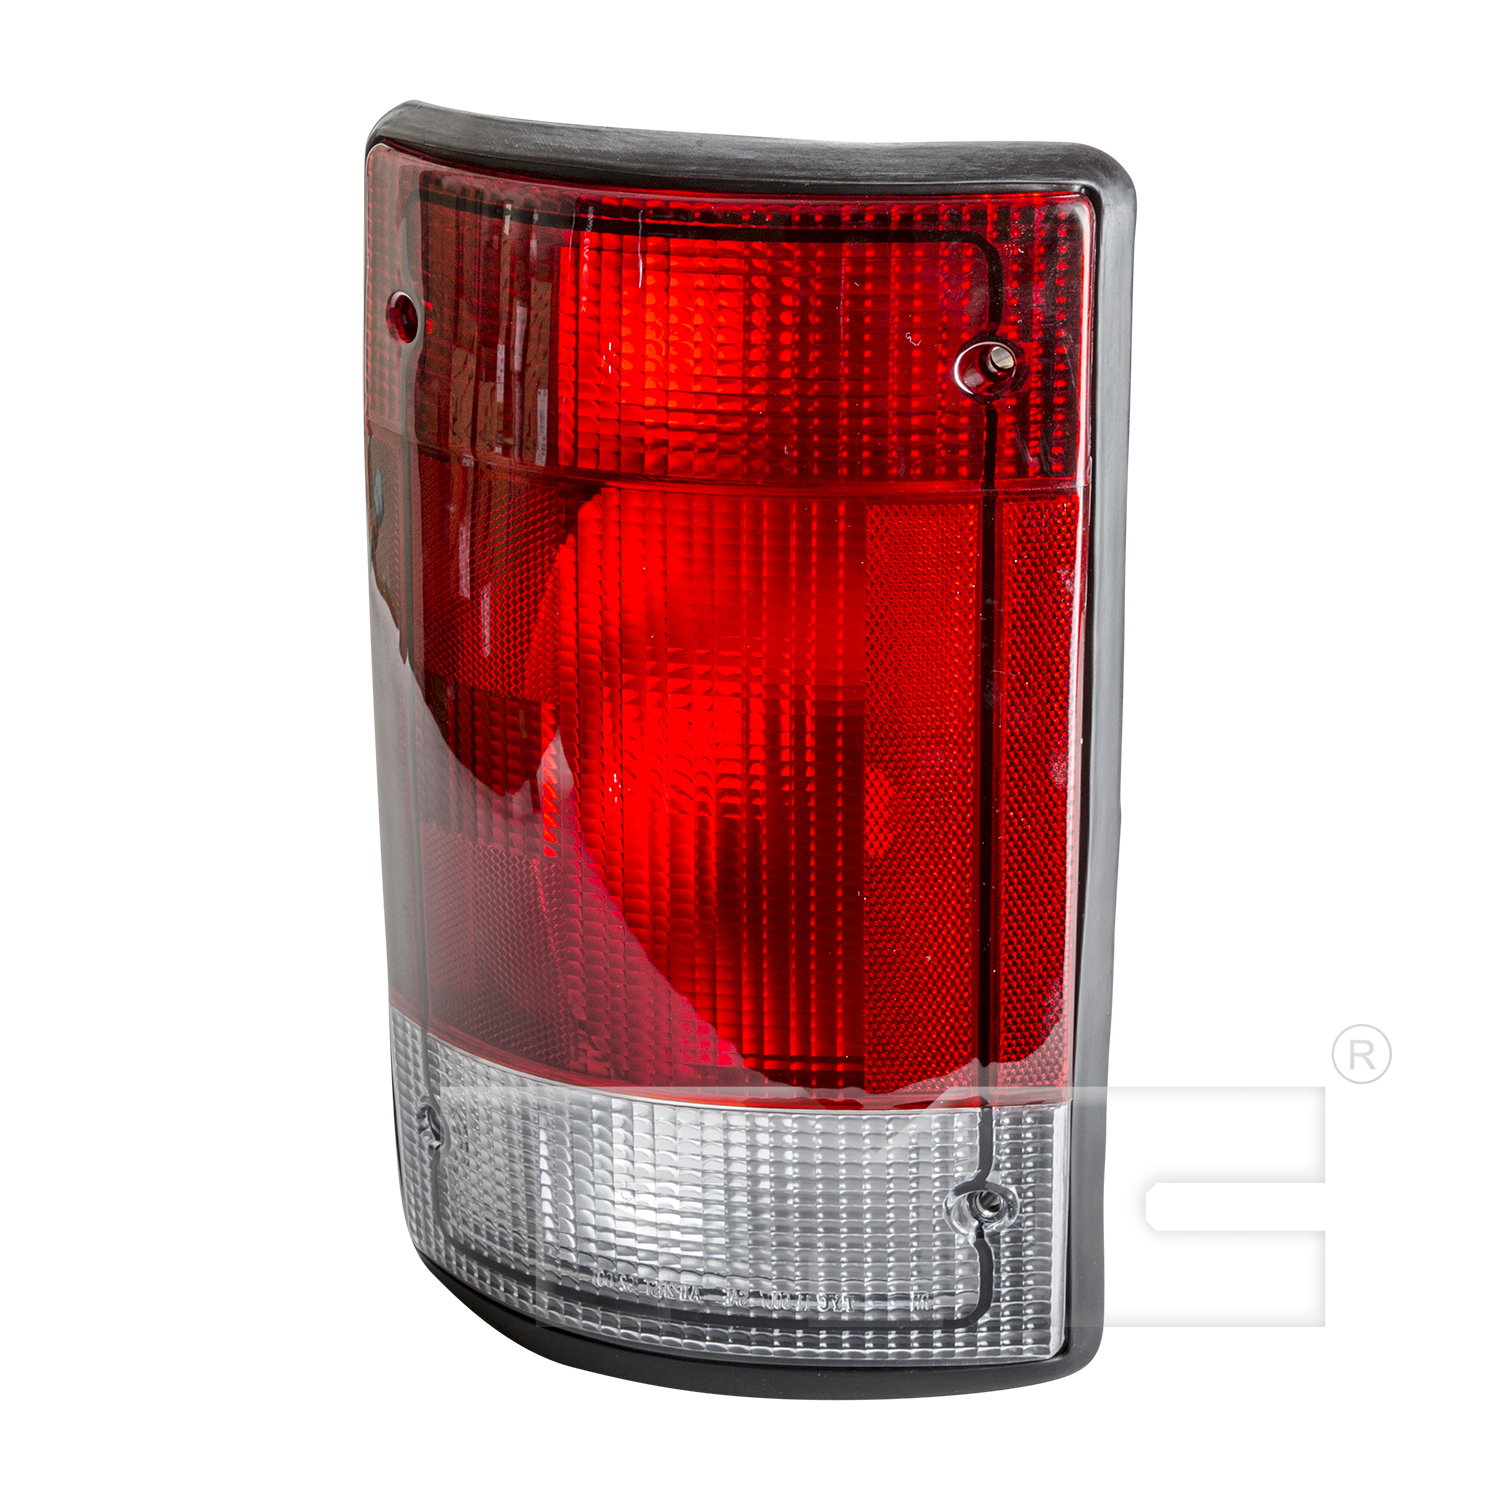 Aftermarket TAILLIGHTS for FORD - E-350 CLUB WAGON, E-350 CLUB WAGON,03-03,LT Taillamp assy